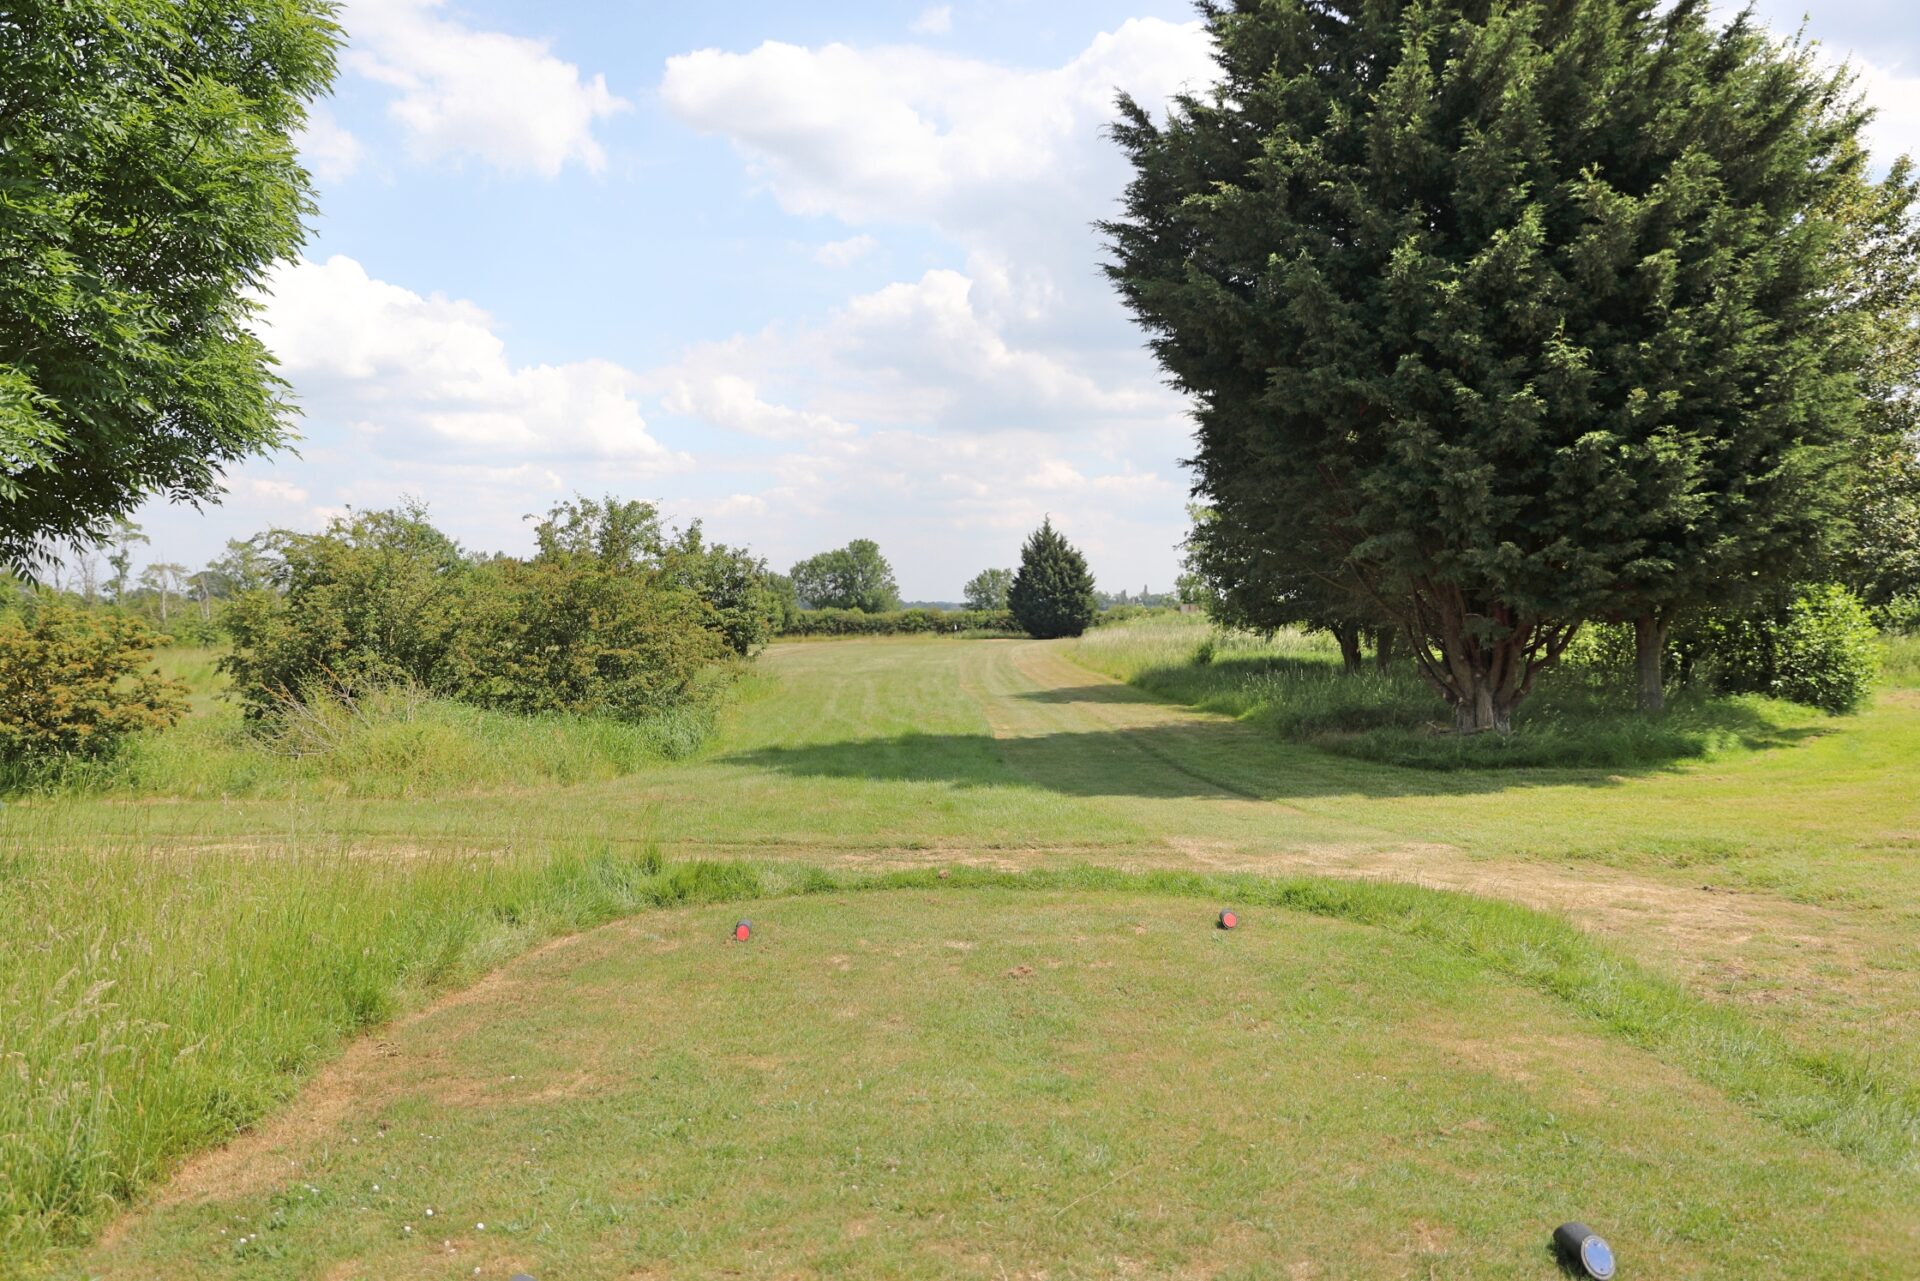 henlow golf course hole 12 image 1